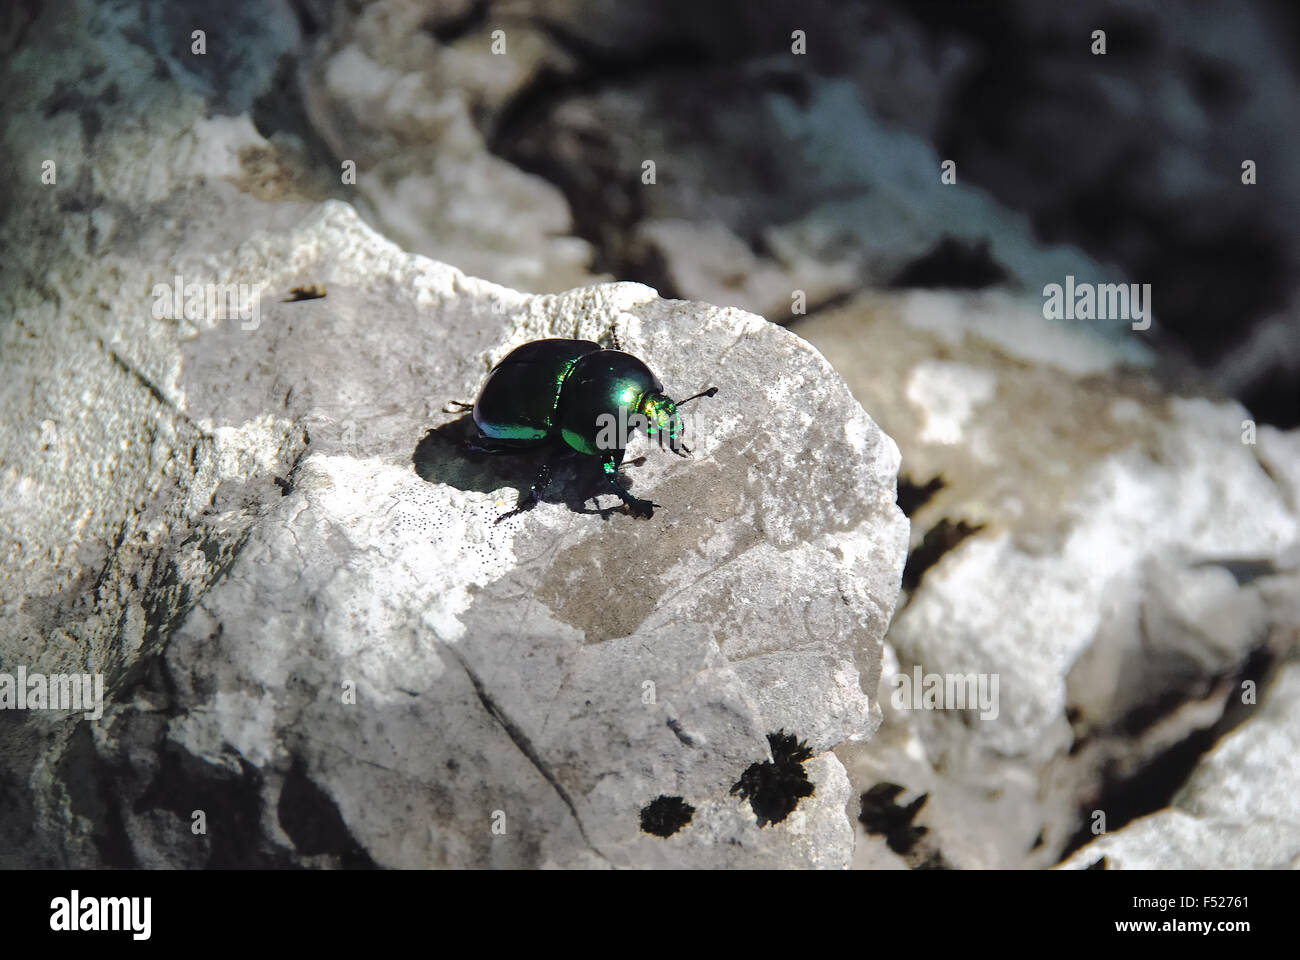 Cetonia aurata photographed on Mount Krn, Slovenia. Cetonia Aurata, called the rose chafer or the green rose chafer, is a beetle, 20 mm (¾ in) long, that has a metallic structurally coloured green and a distinct V-shaped scutellum. Stock Photo